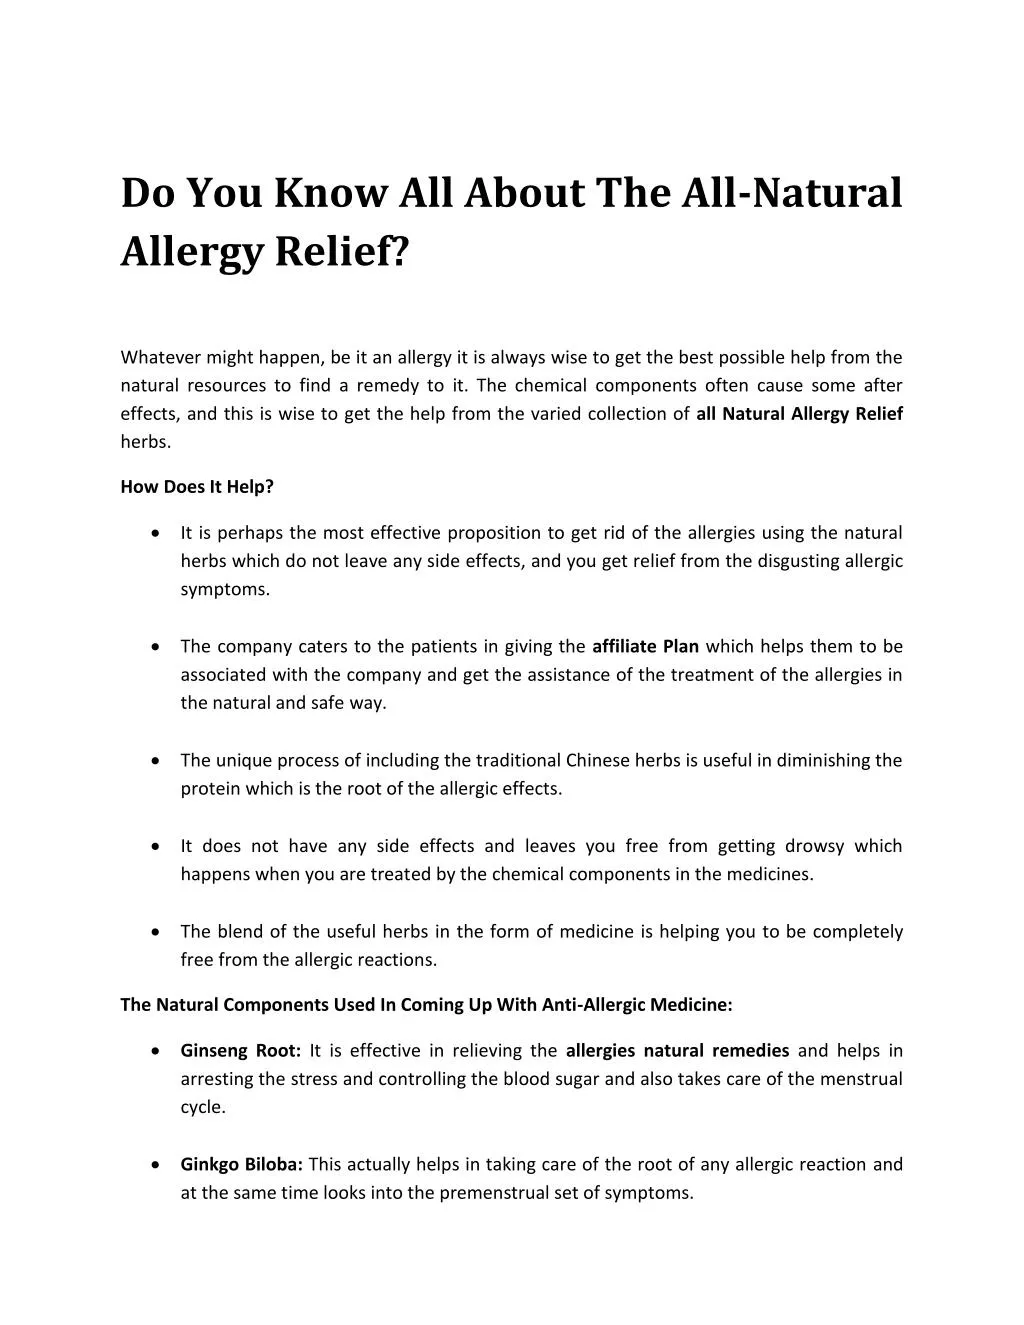 do you know all about the all natural allergy